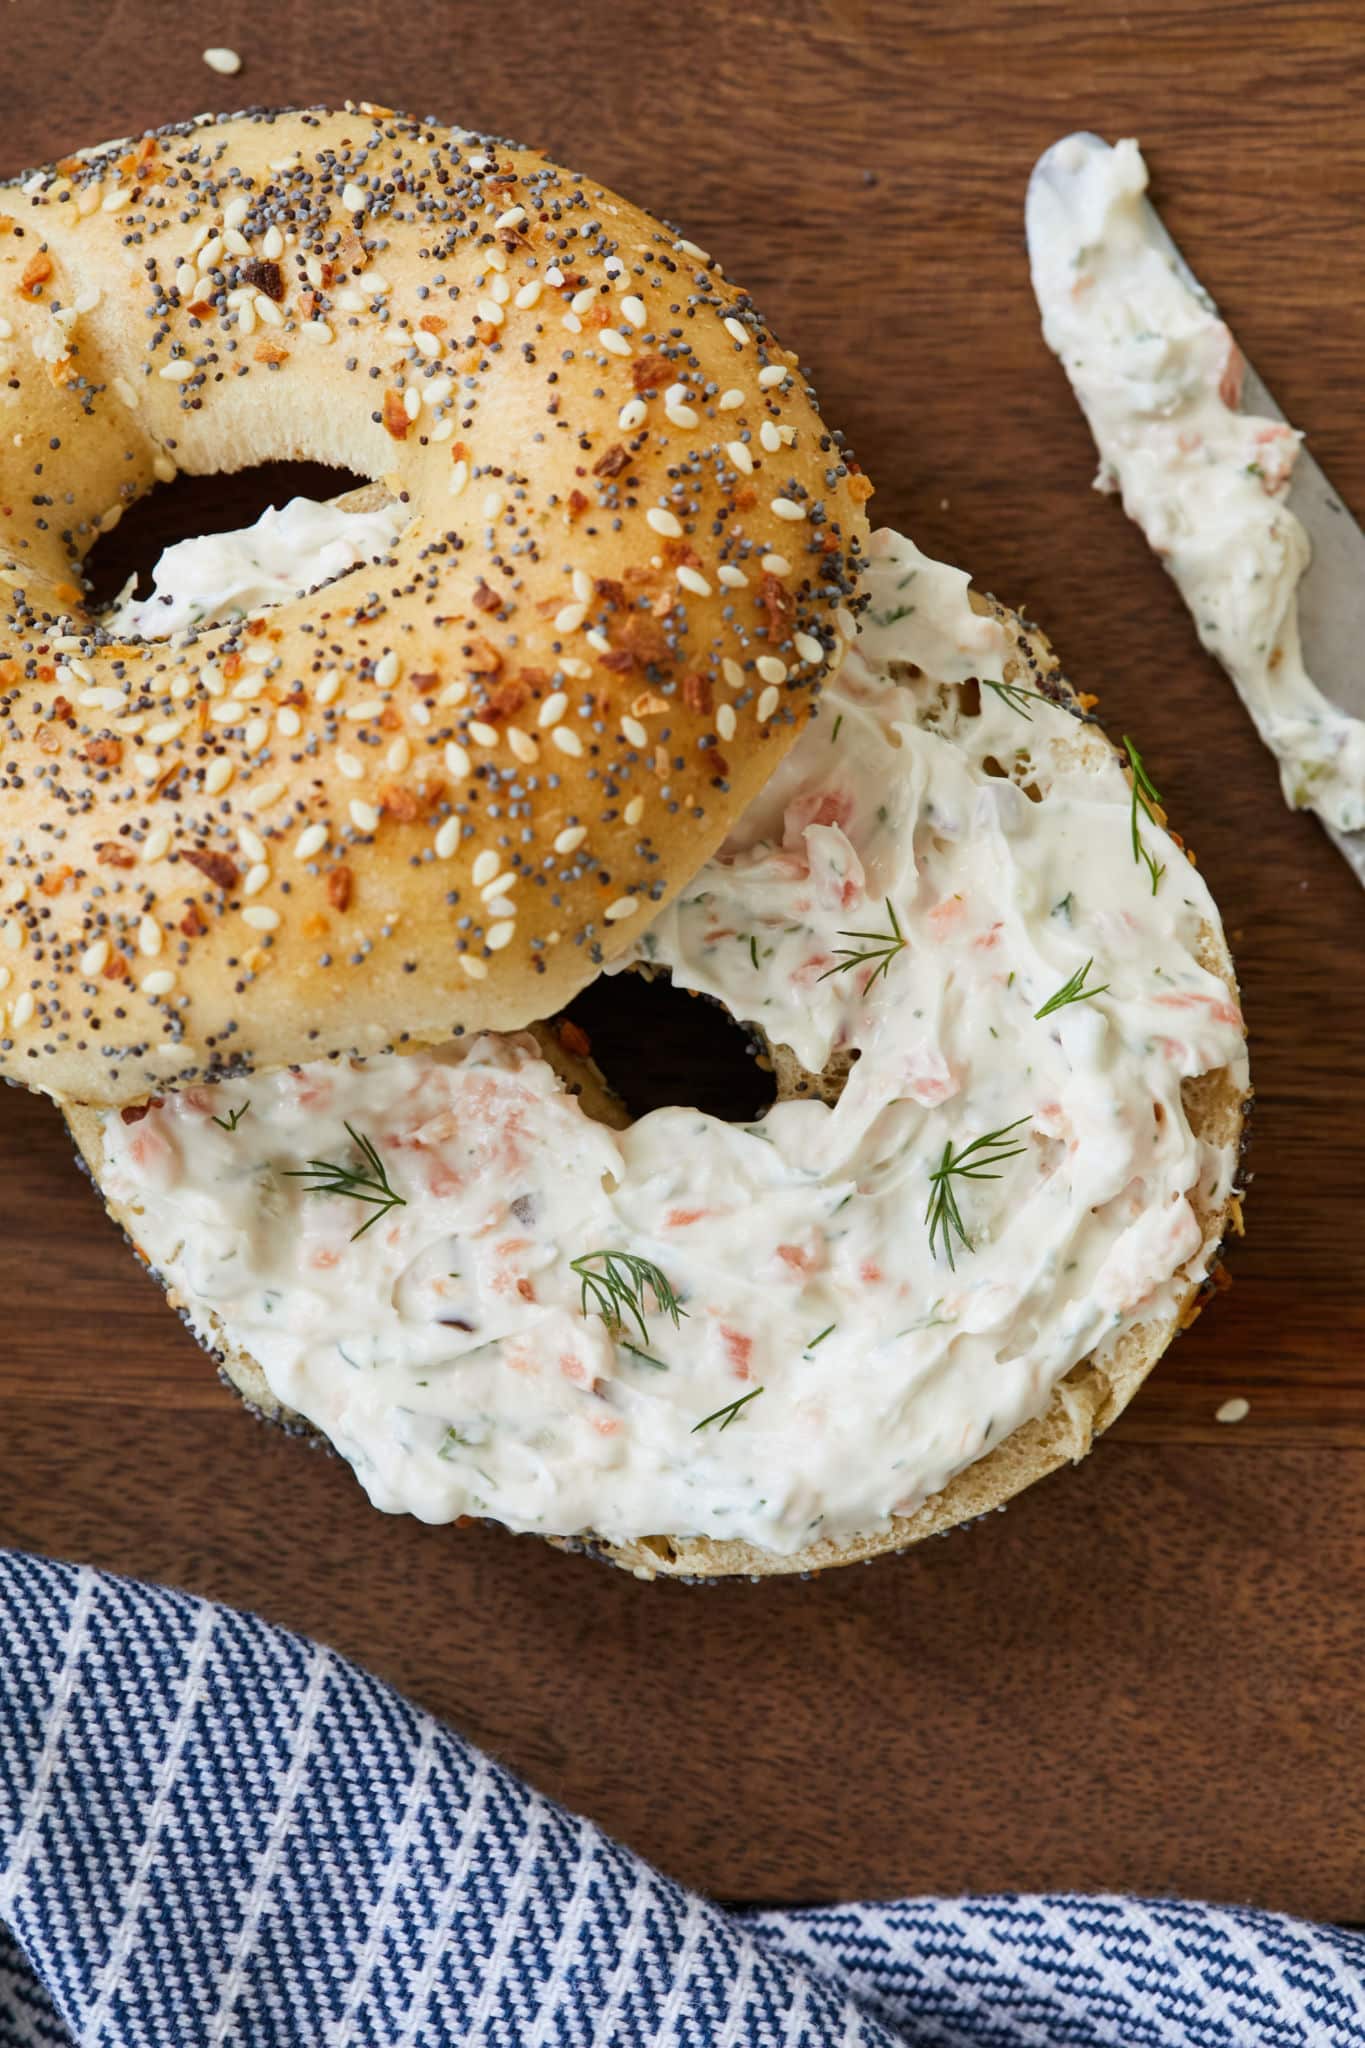 Homemade Smoked Salmon Cream Cheese with fresh dill is spread on an everything bagel.